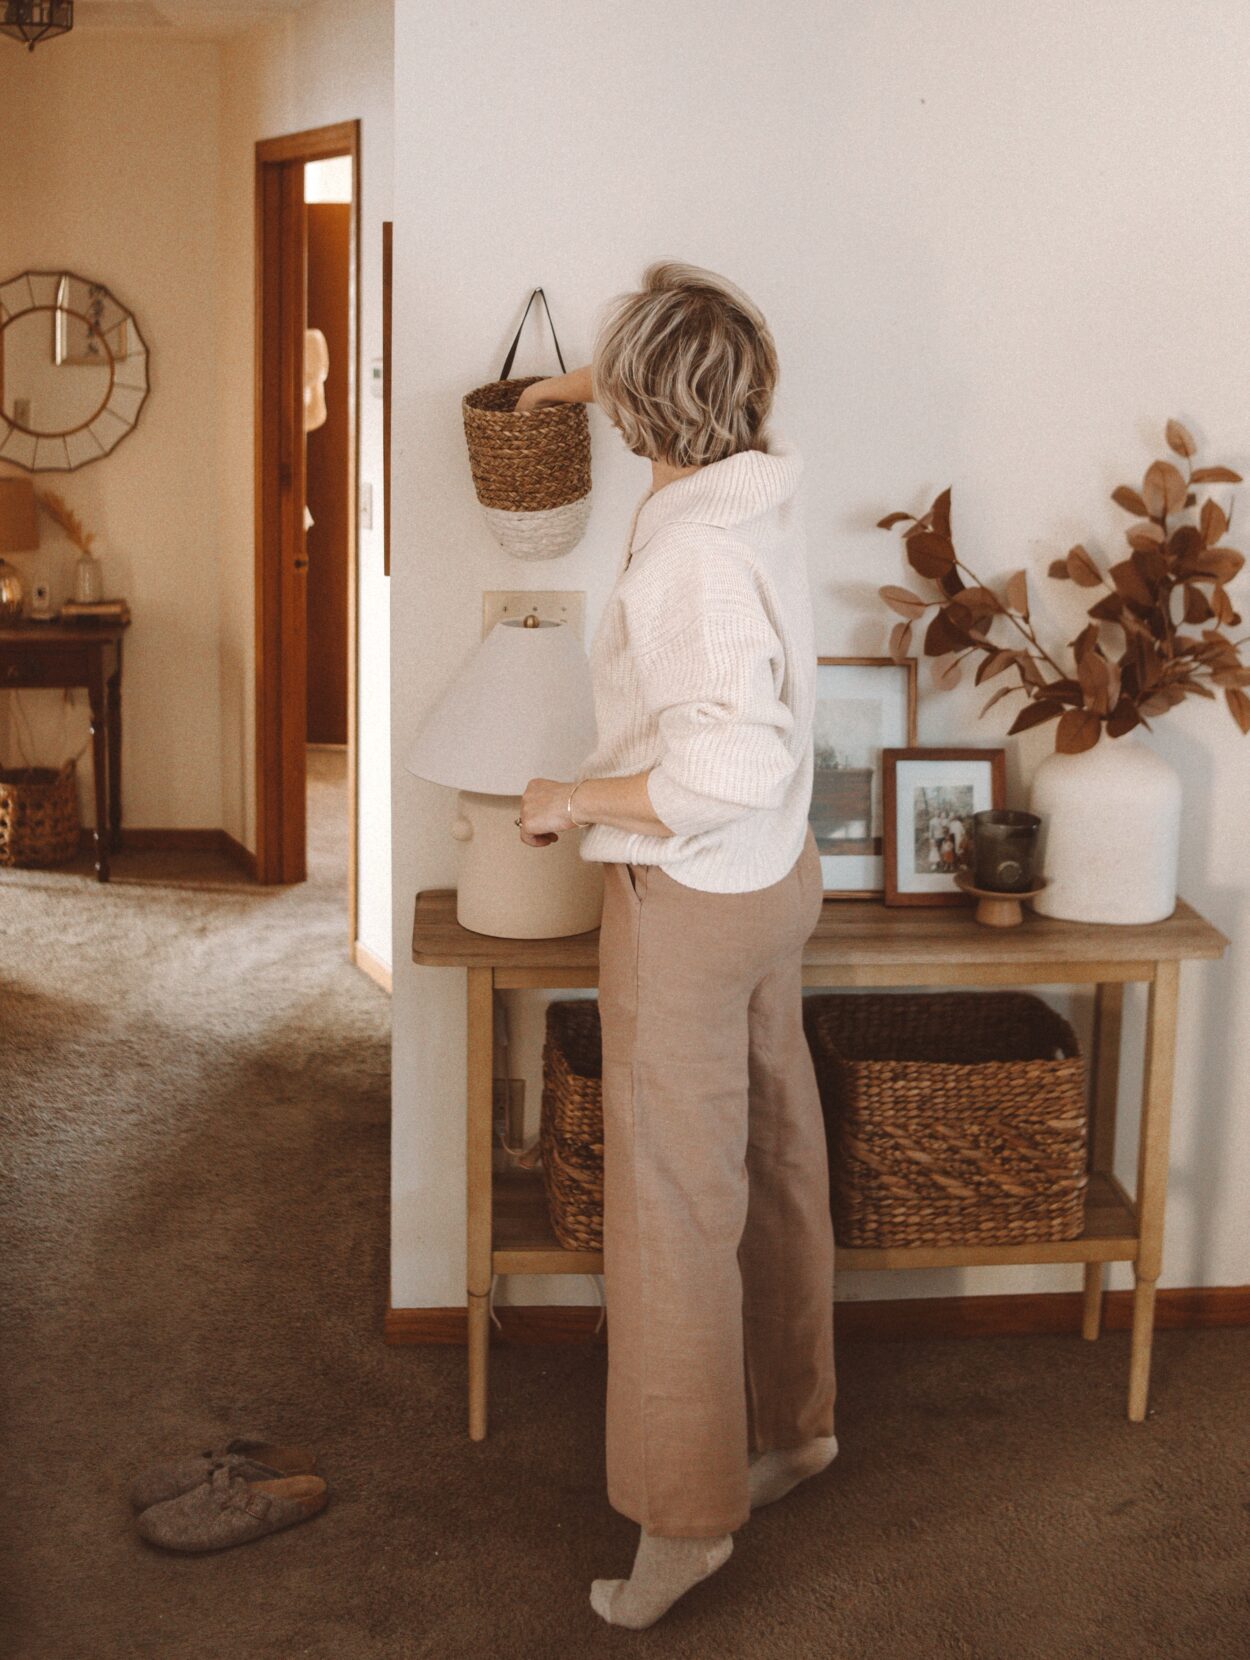 Karin Emily wears a white oversized sweater over tan linen pants with slippers in front of a console table